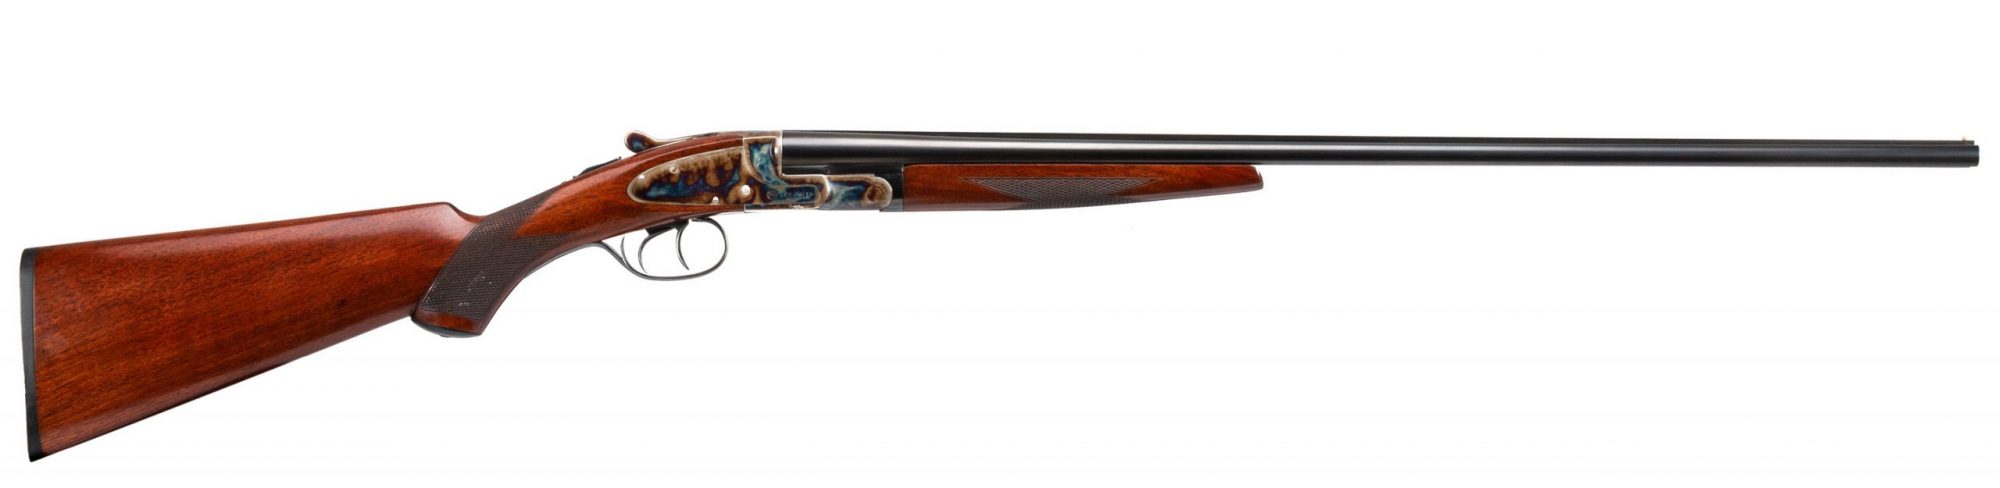 Photo of a pre-owned L.C. Smith Field Grade .410 gauge shotgun featuring bone charcoal color case hardening by Turnbull Restoration